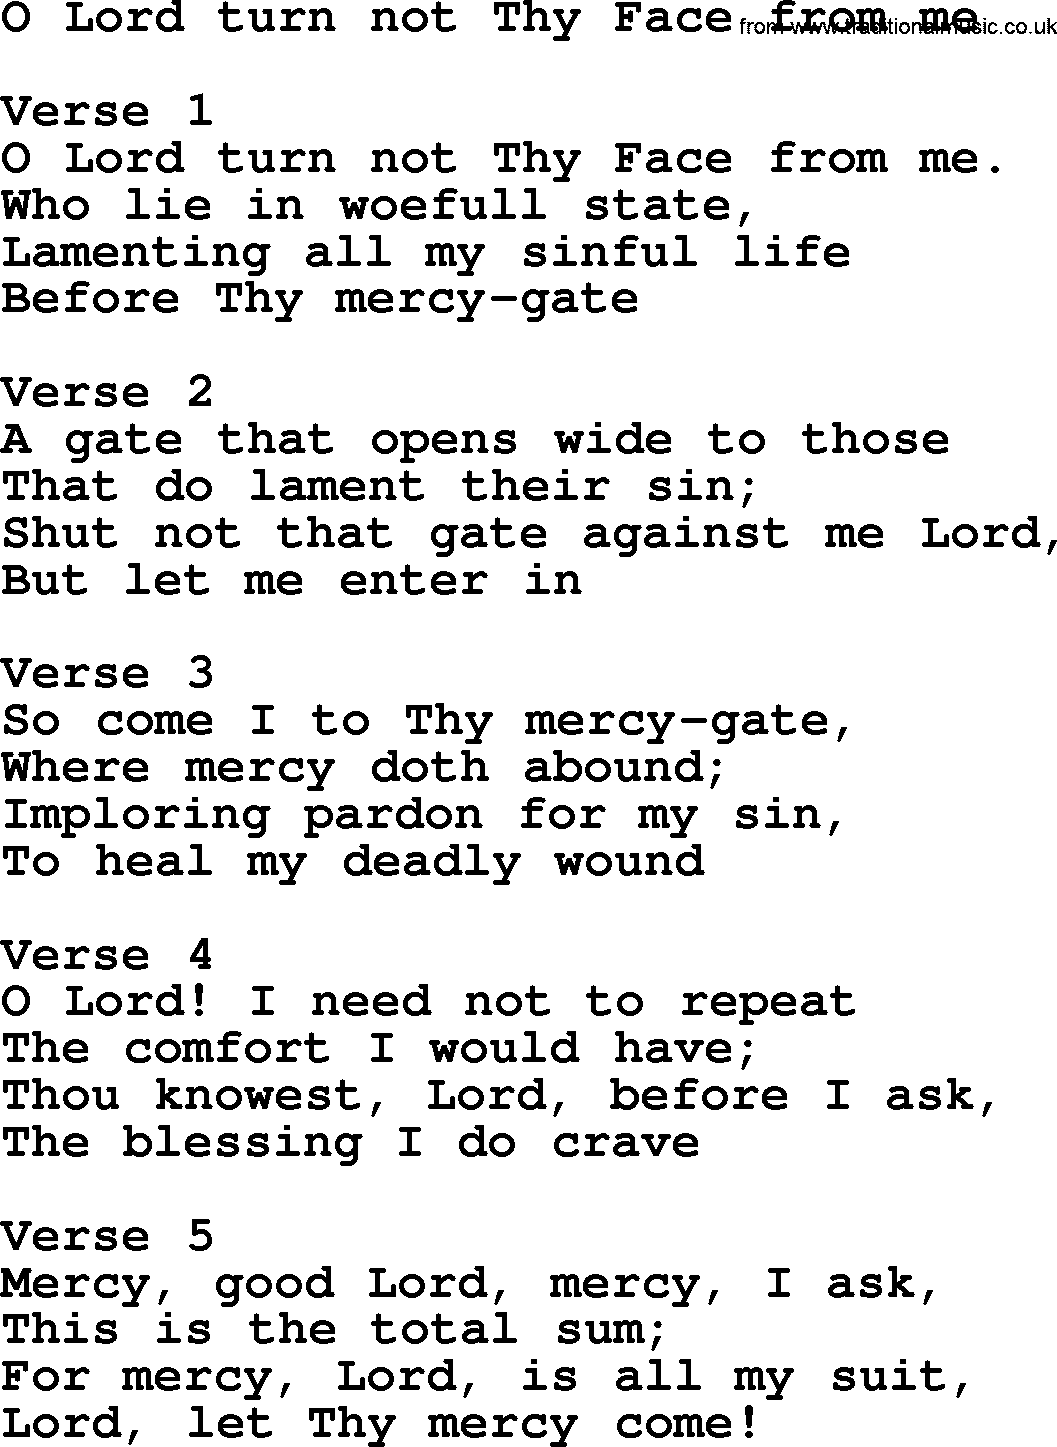 Apostolic and Pentecostal Hymns and Gospel Songs, Hymn: O Lord Turn Not Thy Face From Me, Christian lyrics and PDF